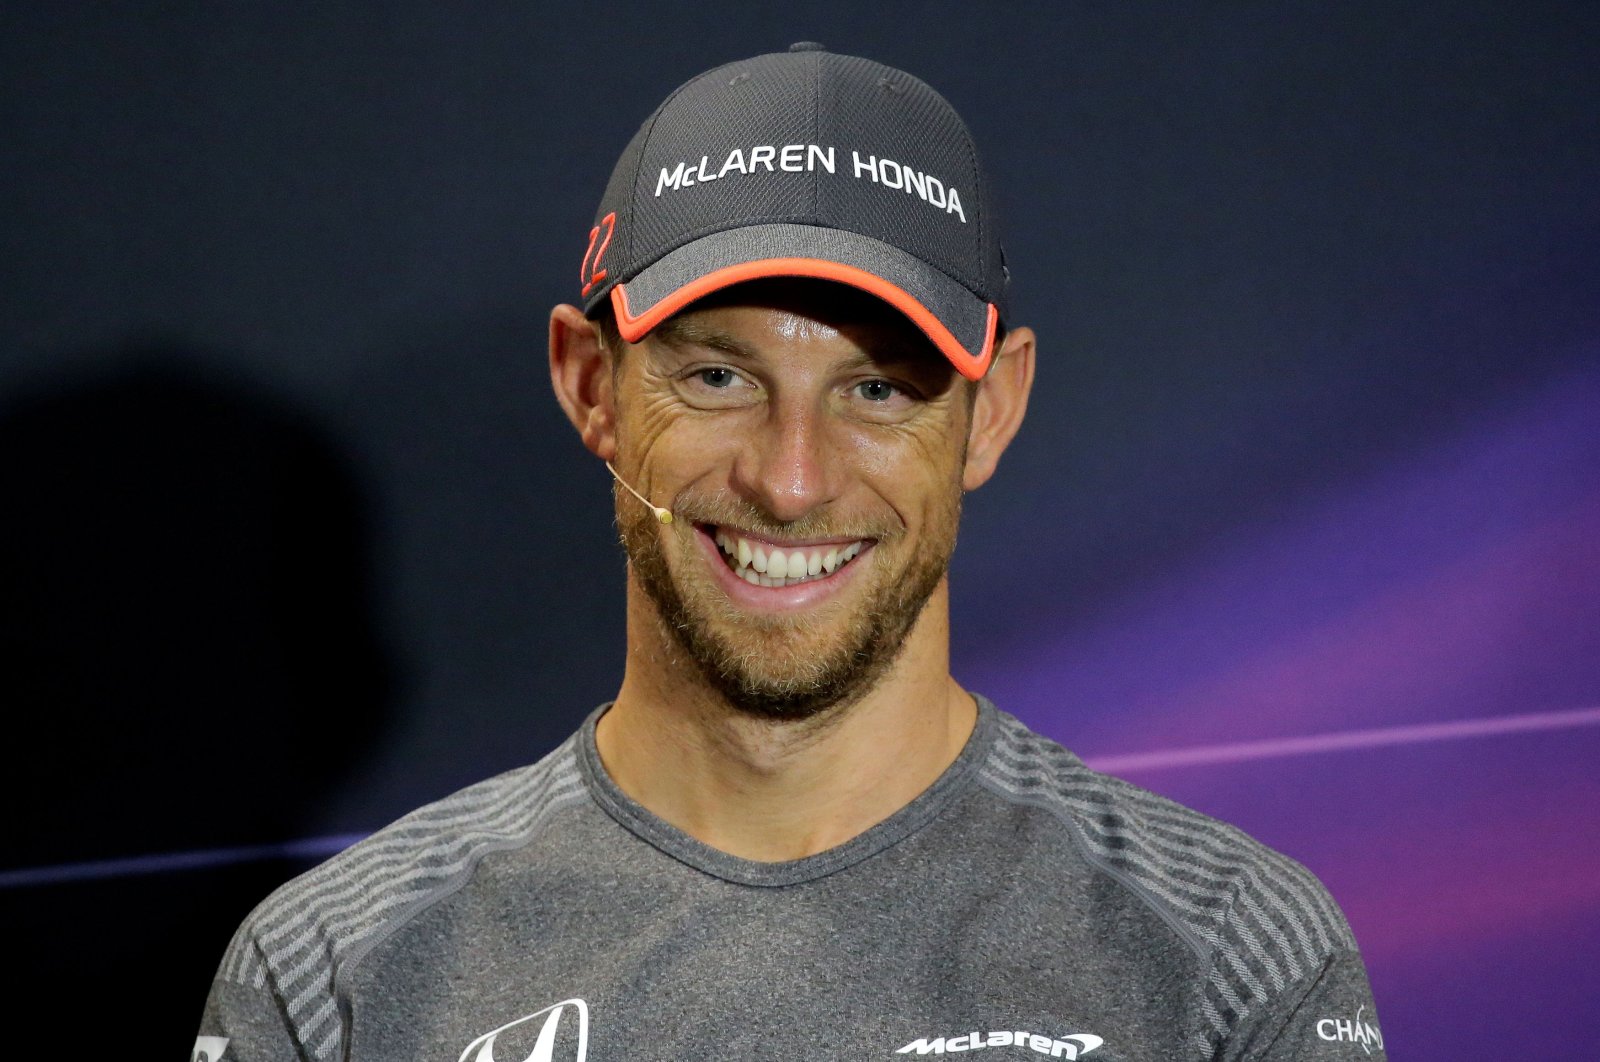 This file photo shows then-McLaren F1 driver Jenson Button during a news conference ahead of the Monaco Grand Prix, on May 24, 2017. (REUTERS Photo)